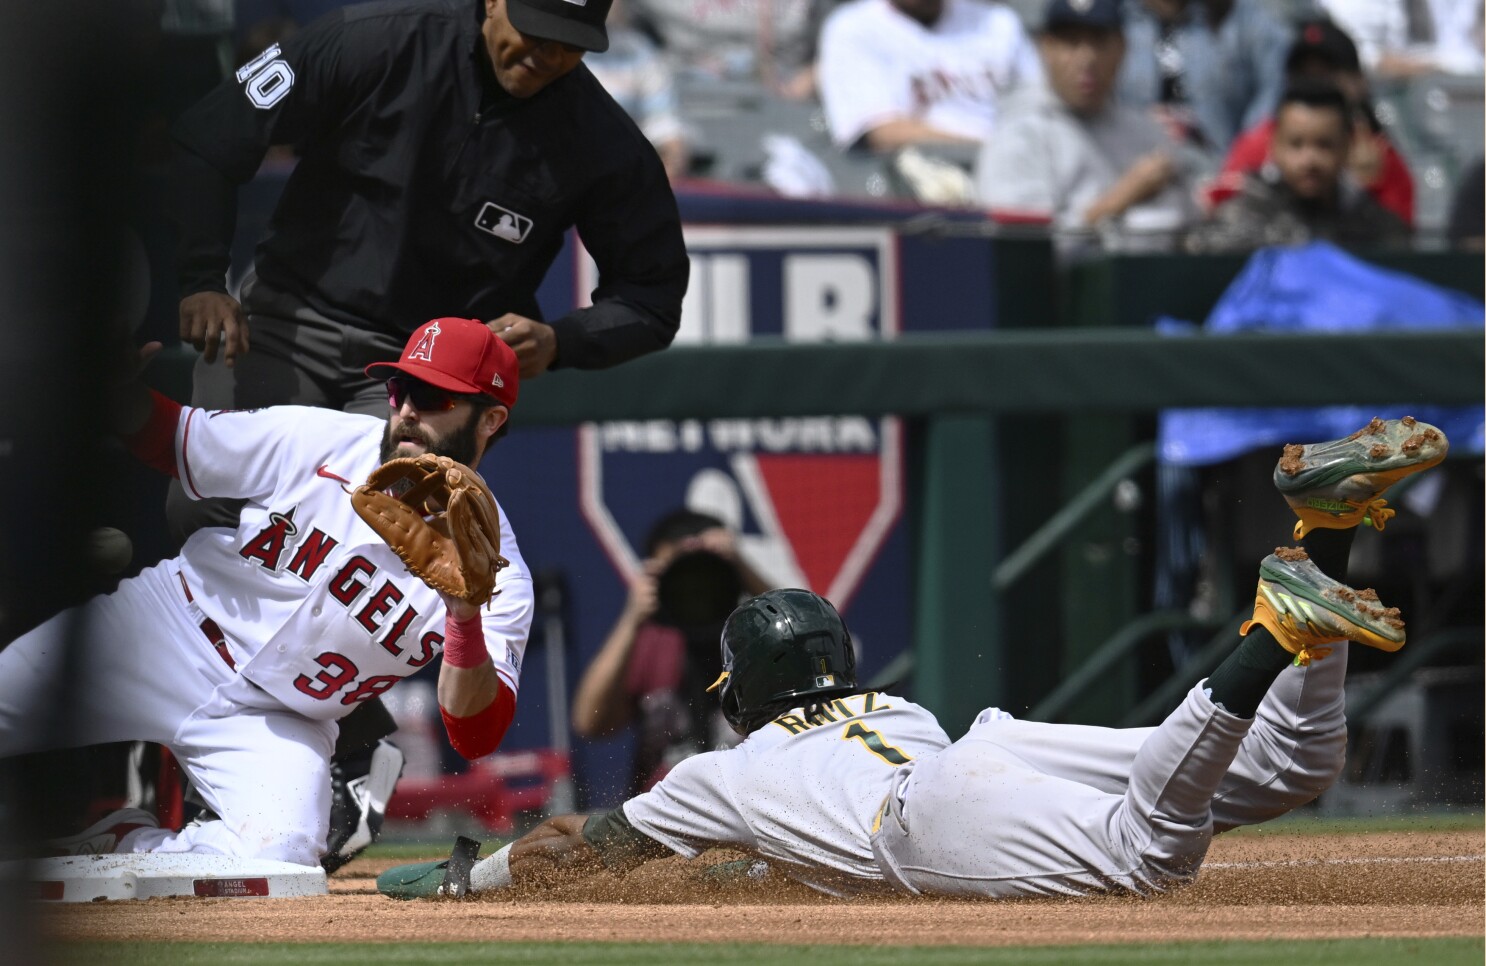 Angels need to spend big in free agency. Start at shortstop - Los